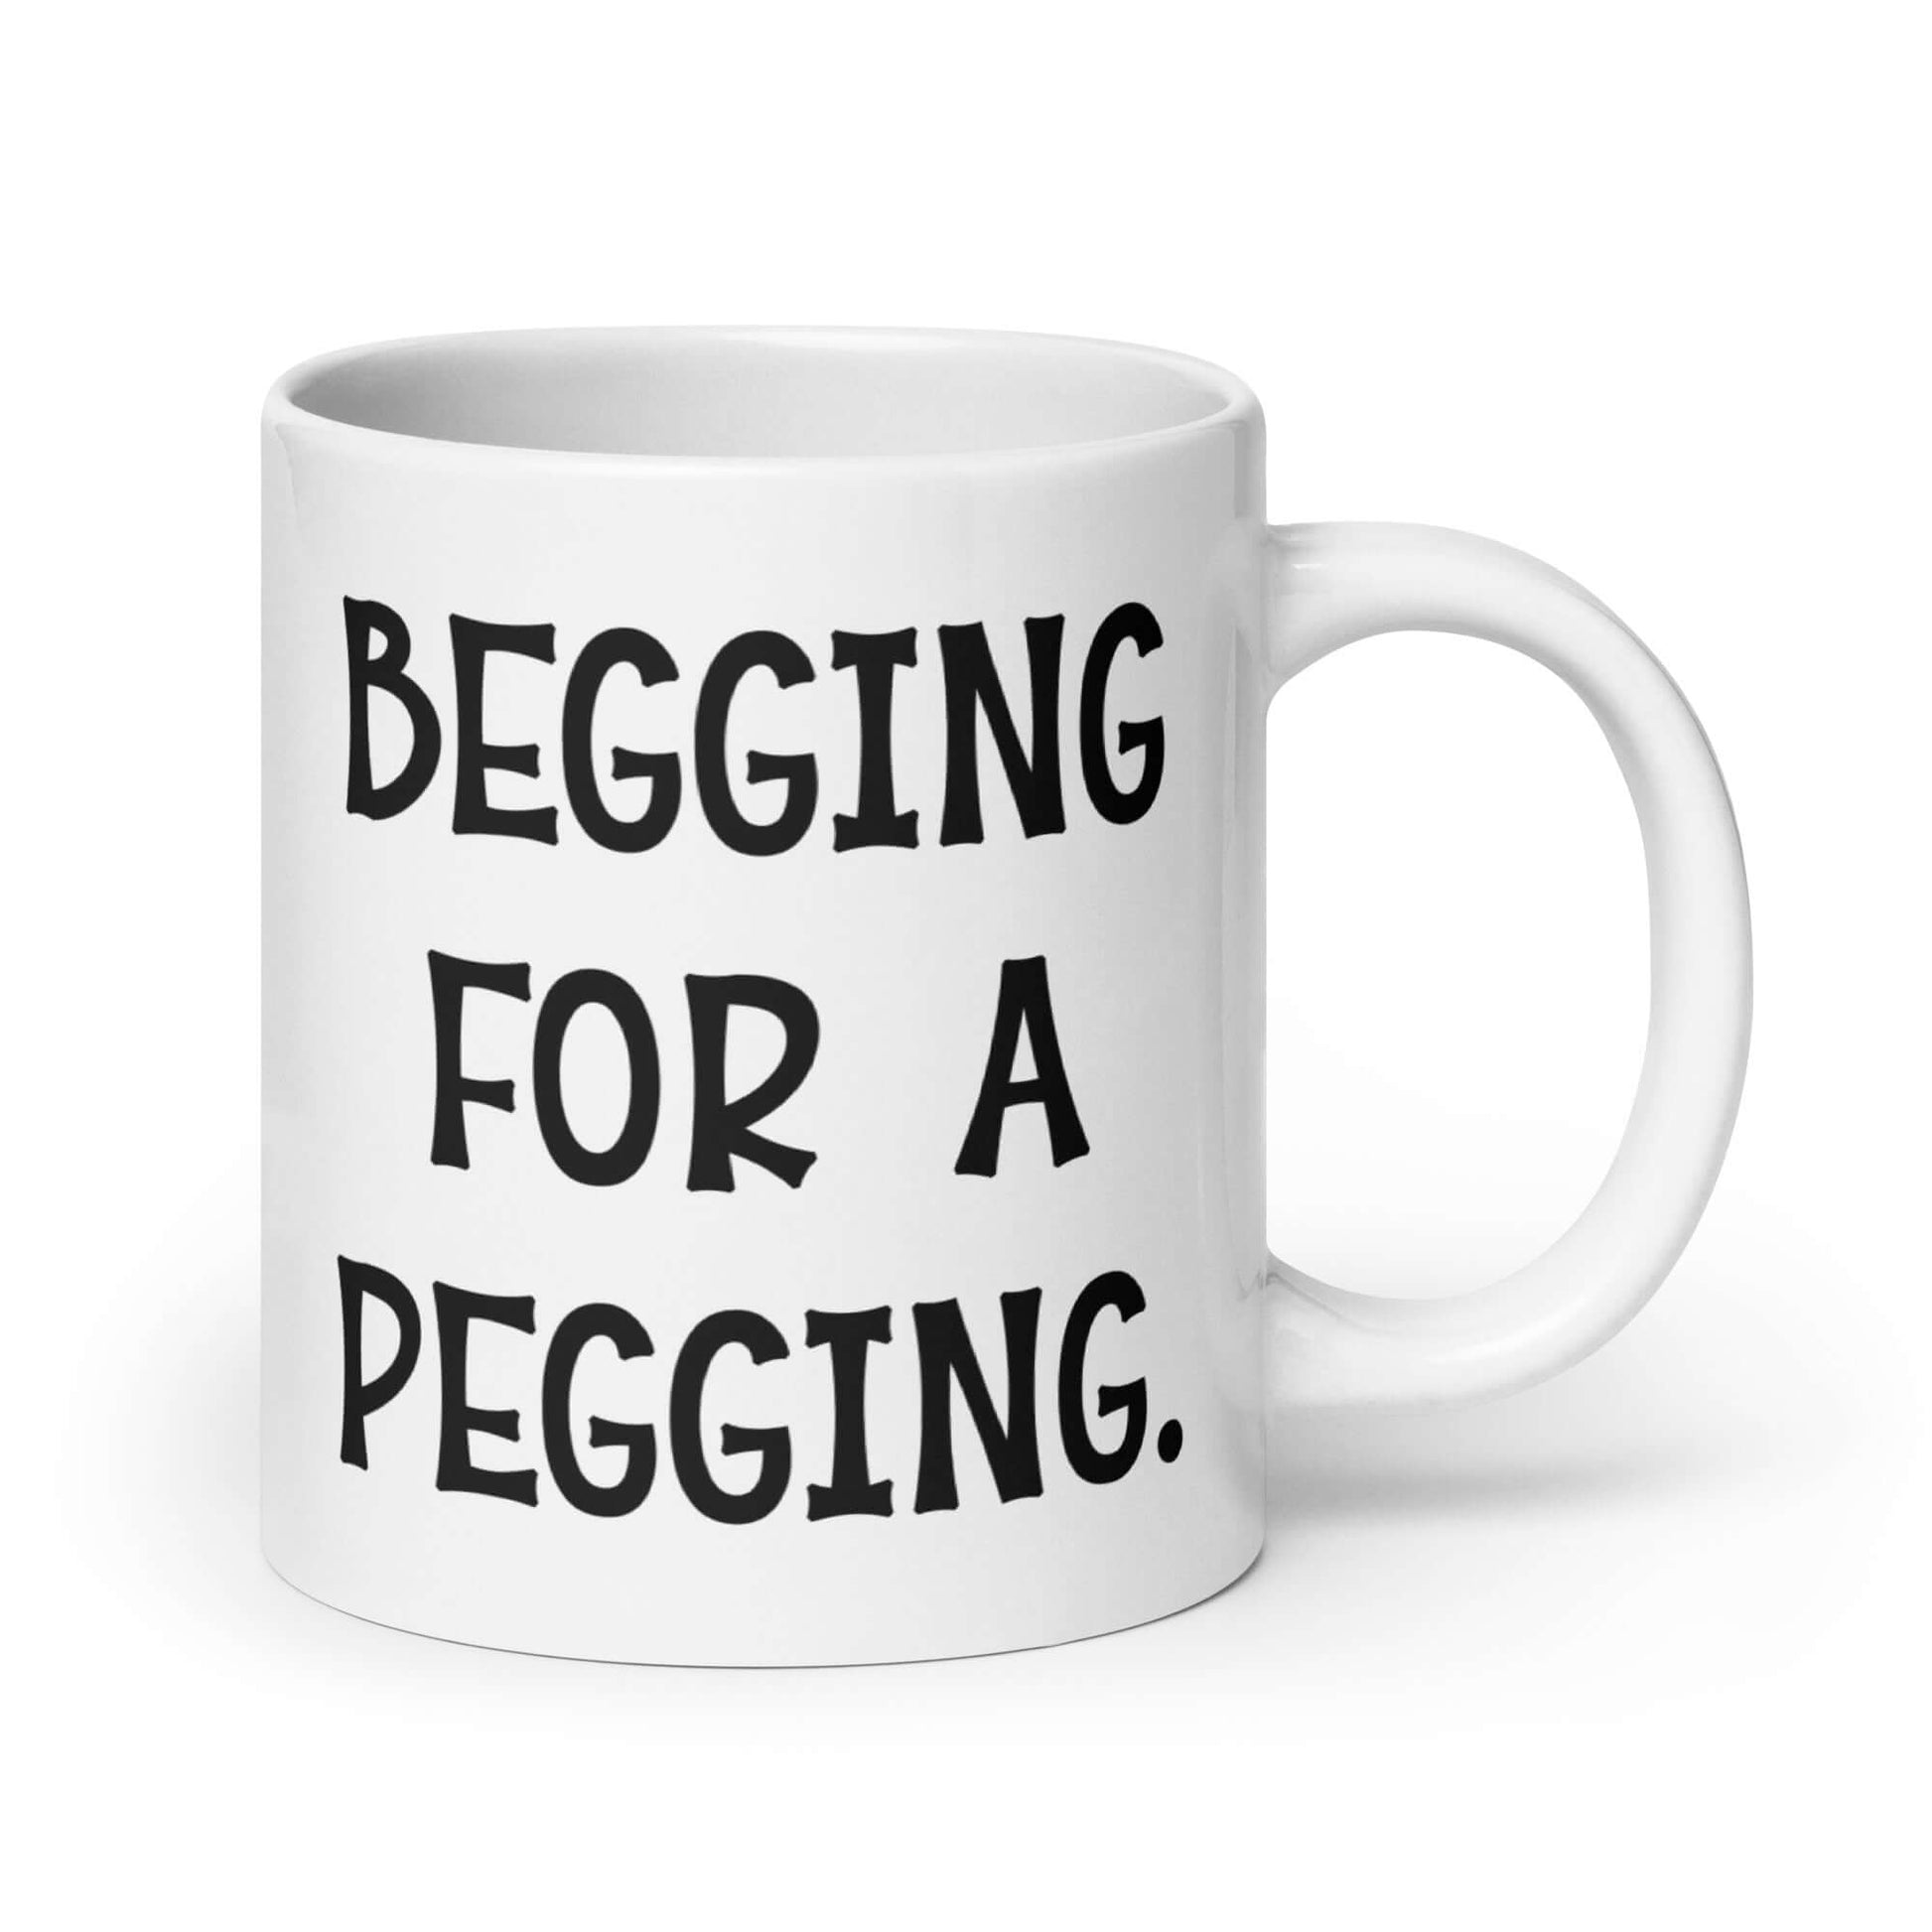 White ceramic coffee mug with the words Begging for a pegging printed on both sides.